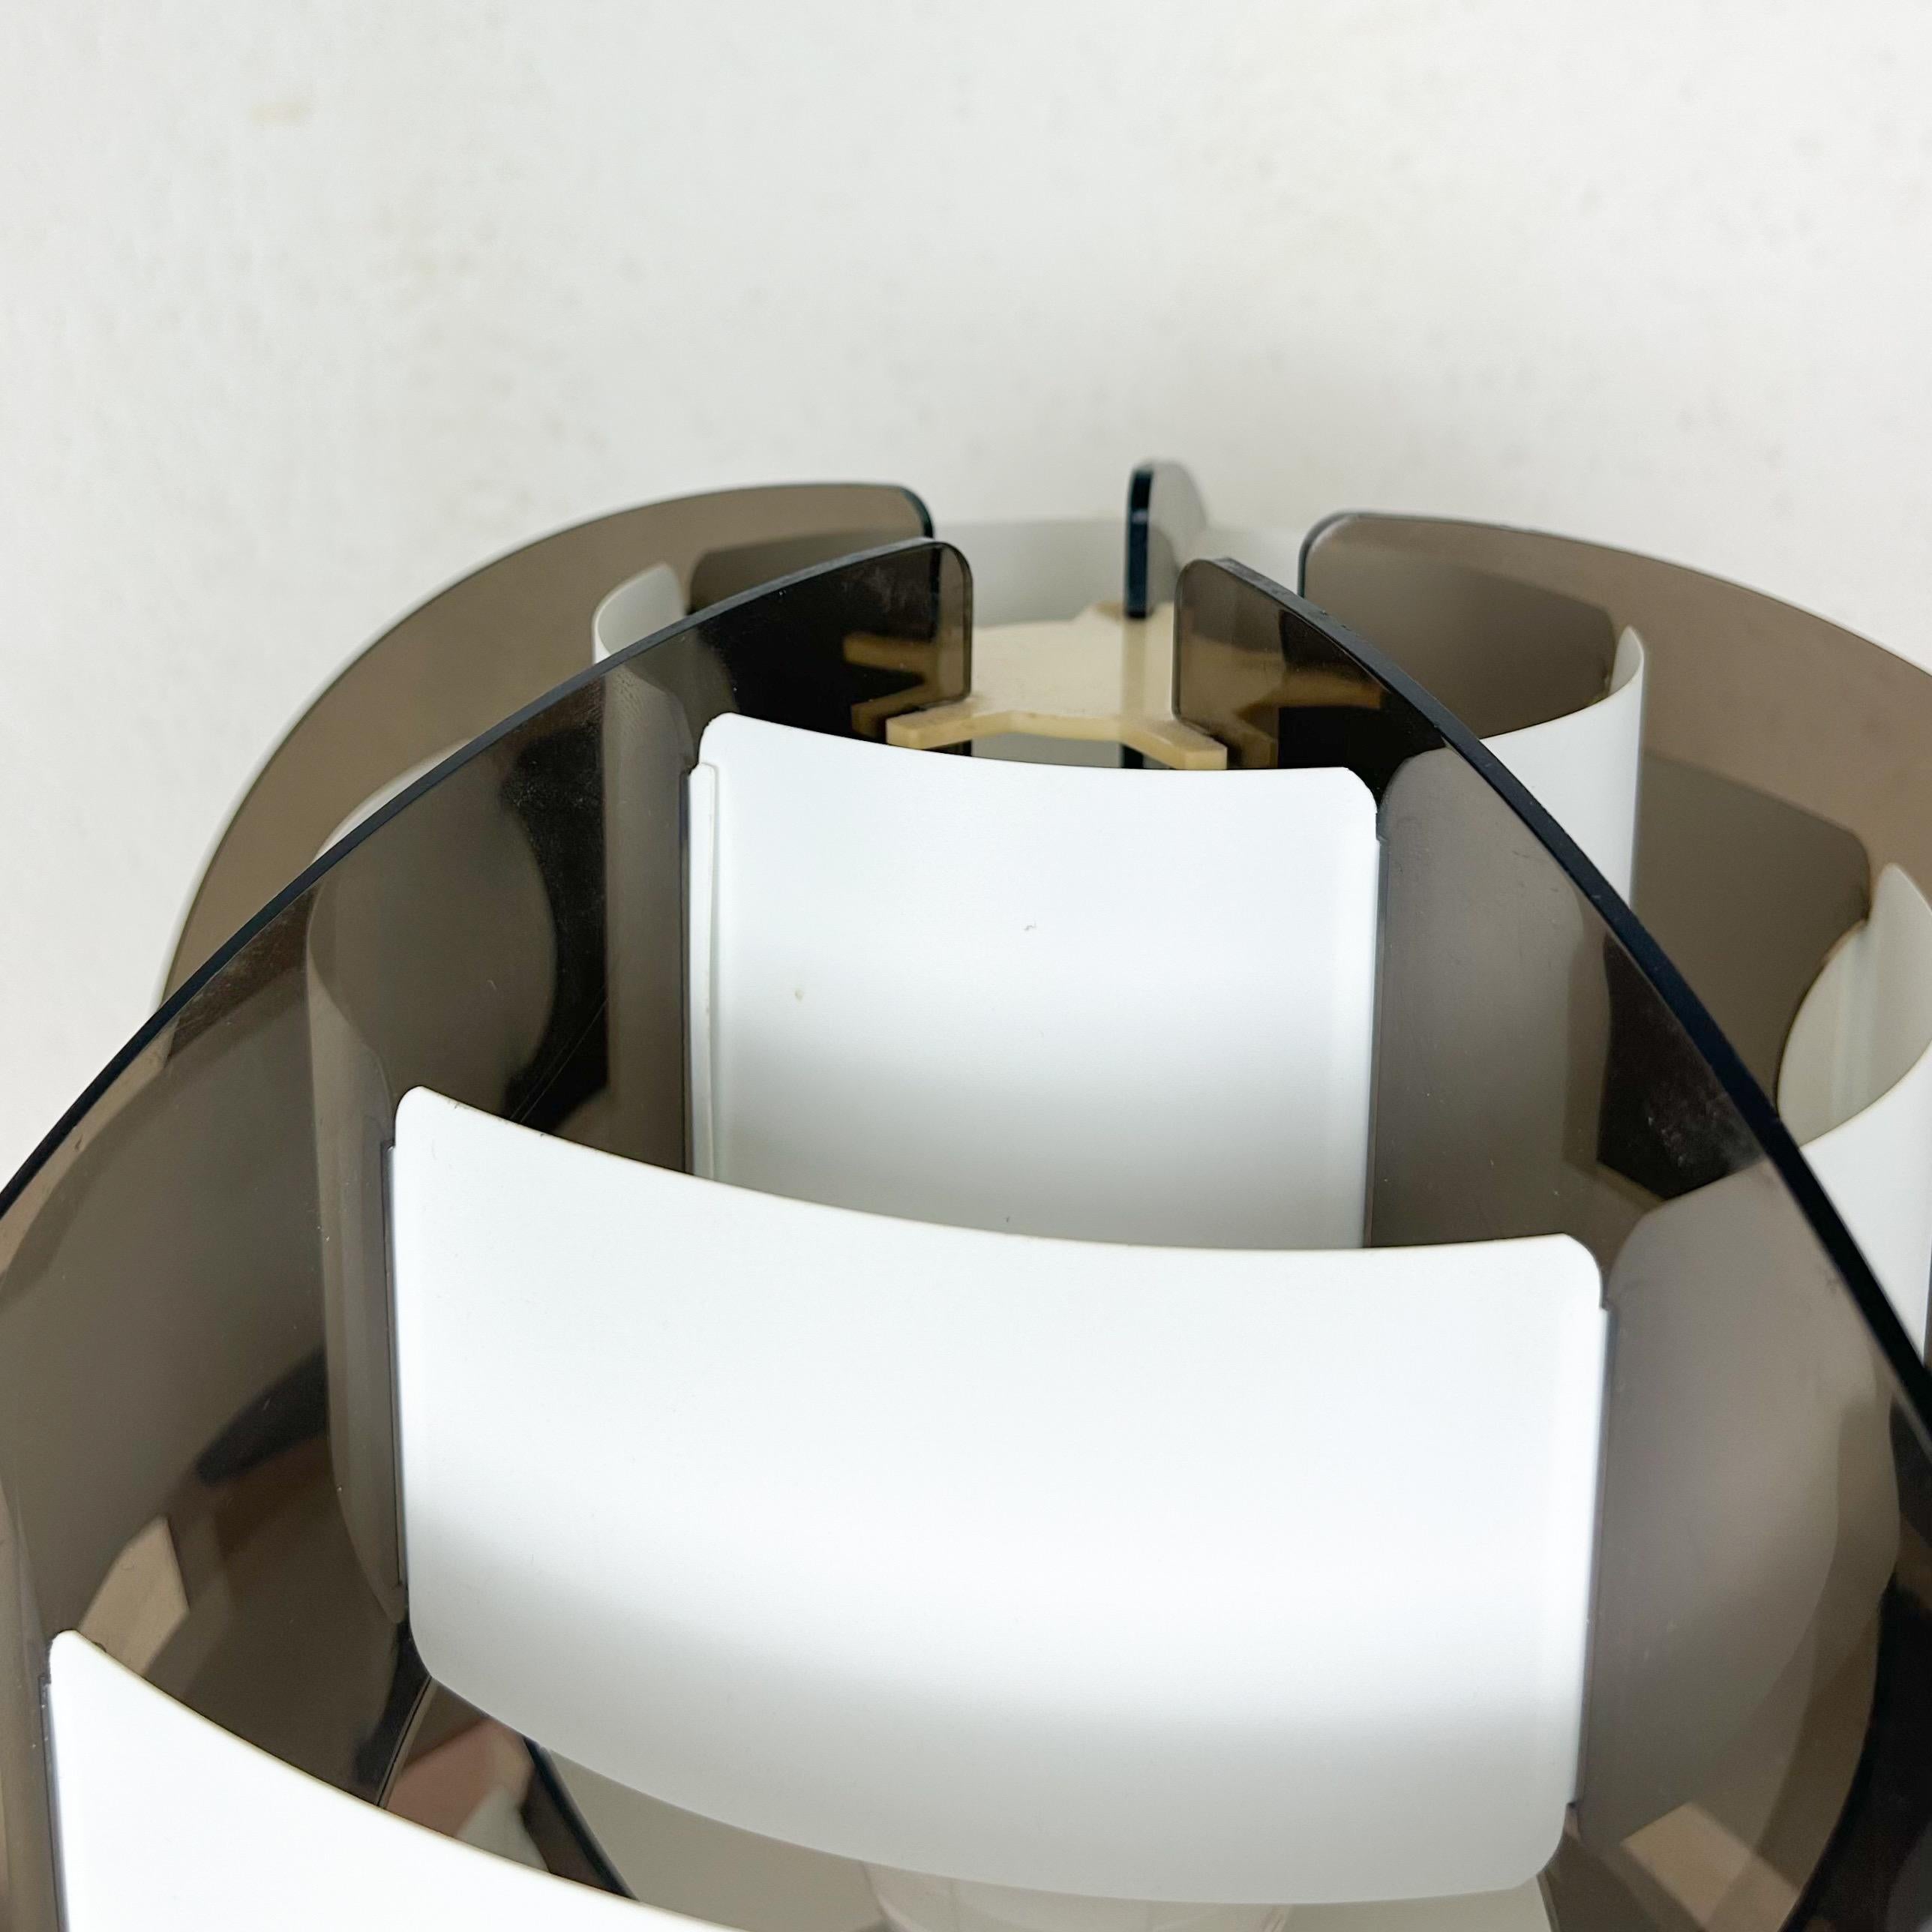 Late 20th Century Space Age Table Lamp by Flemming Brylle & Preben Jacobsen - Danish, c1960/70s